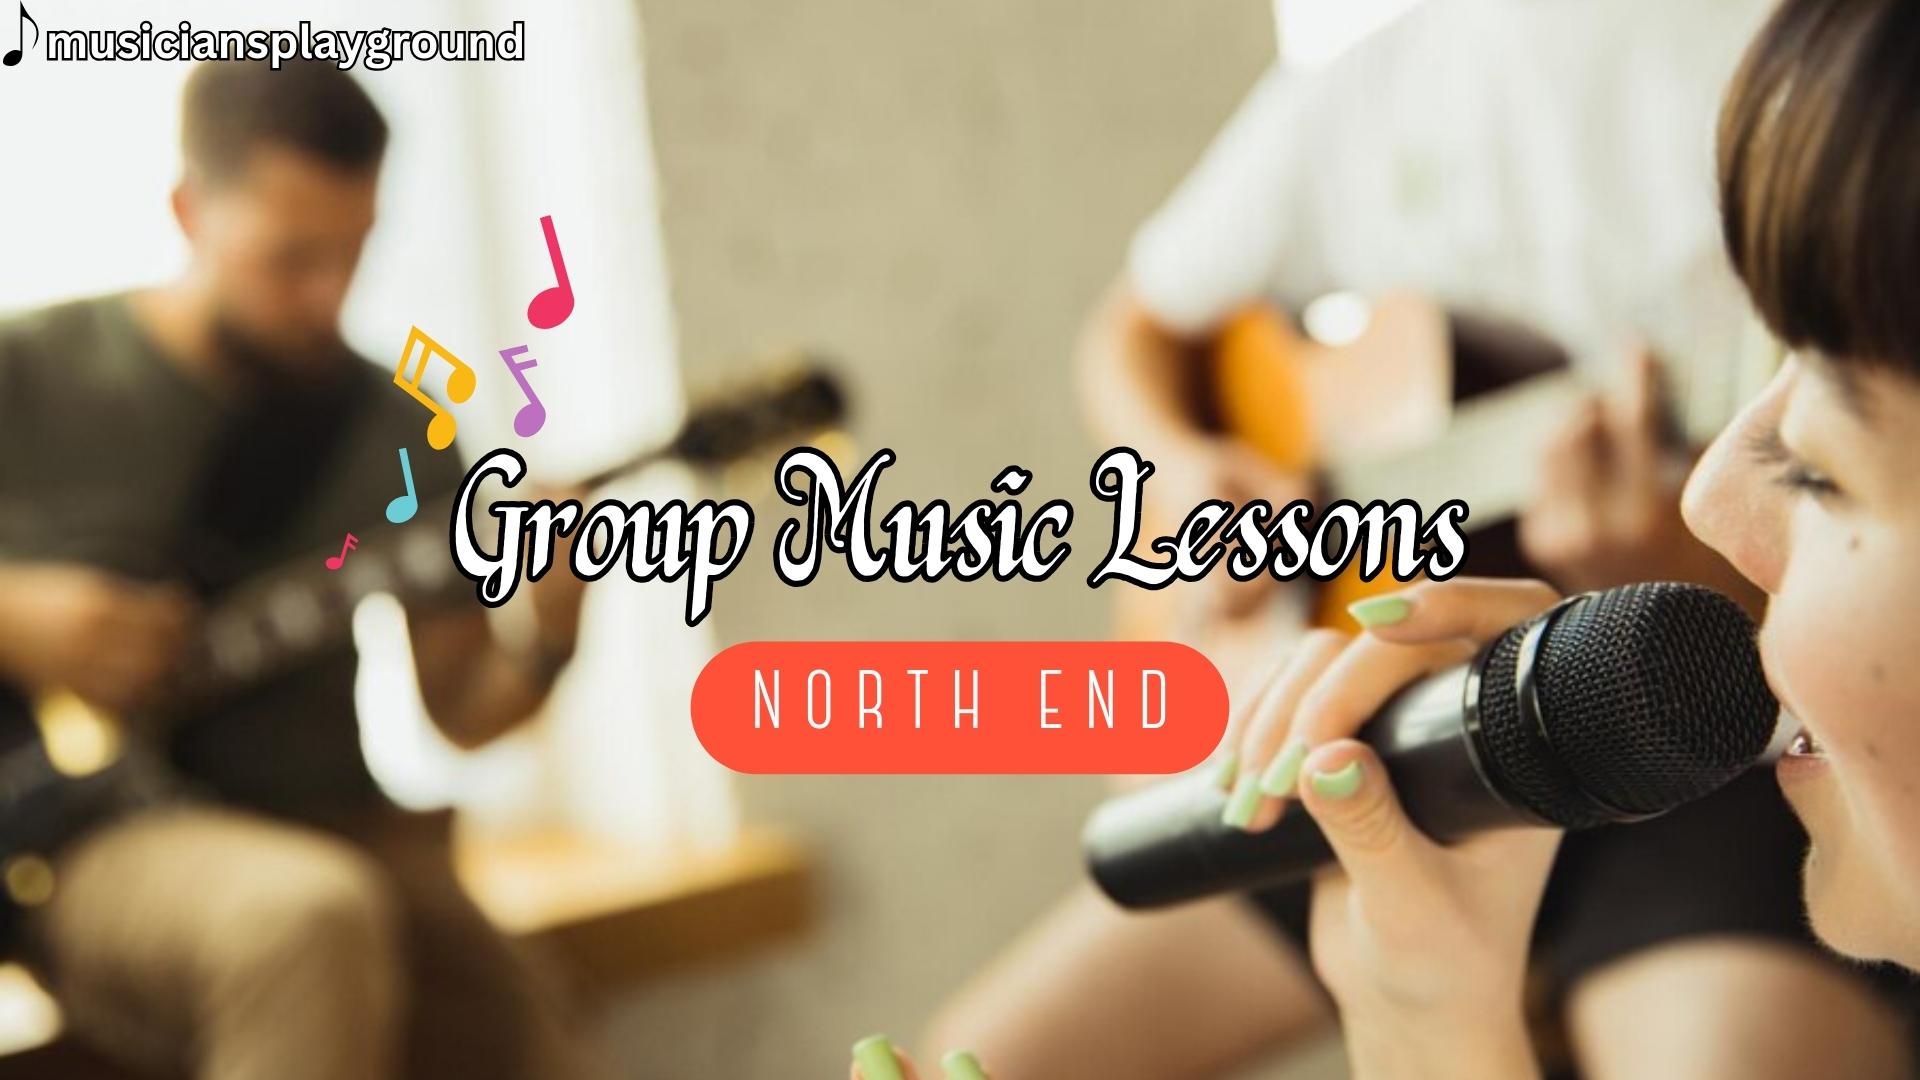 Group Music Lessons in North End, Massachusetts: Enhancing Musical Skills at Musicians Playground